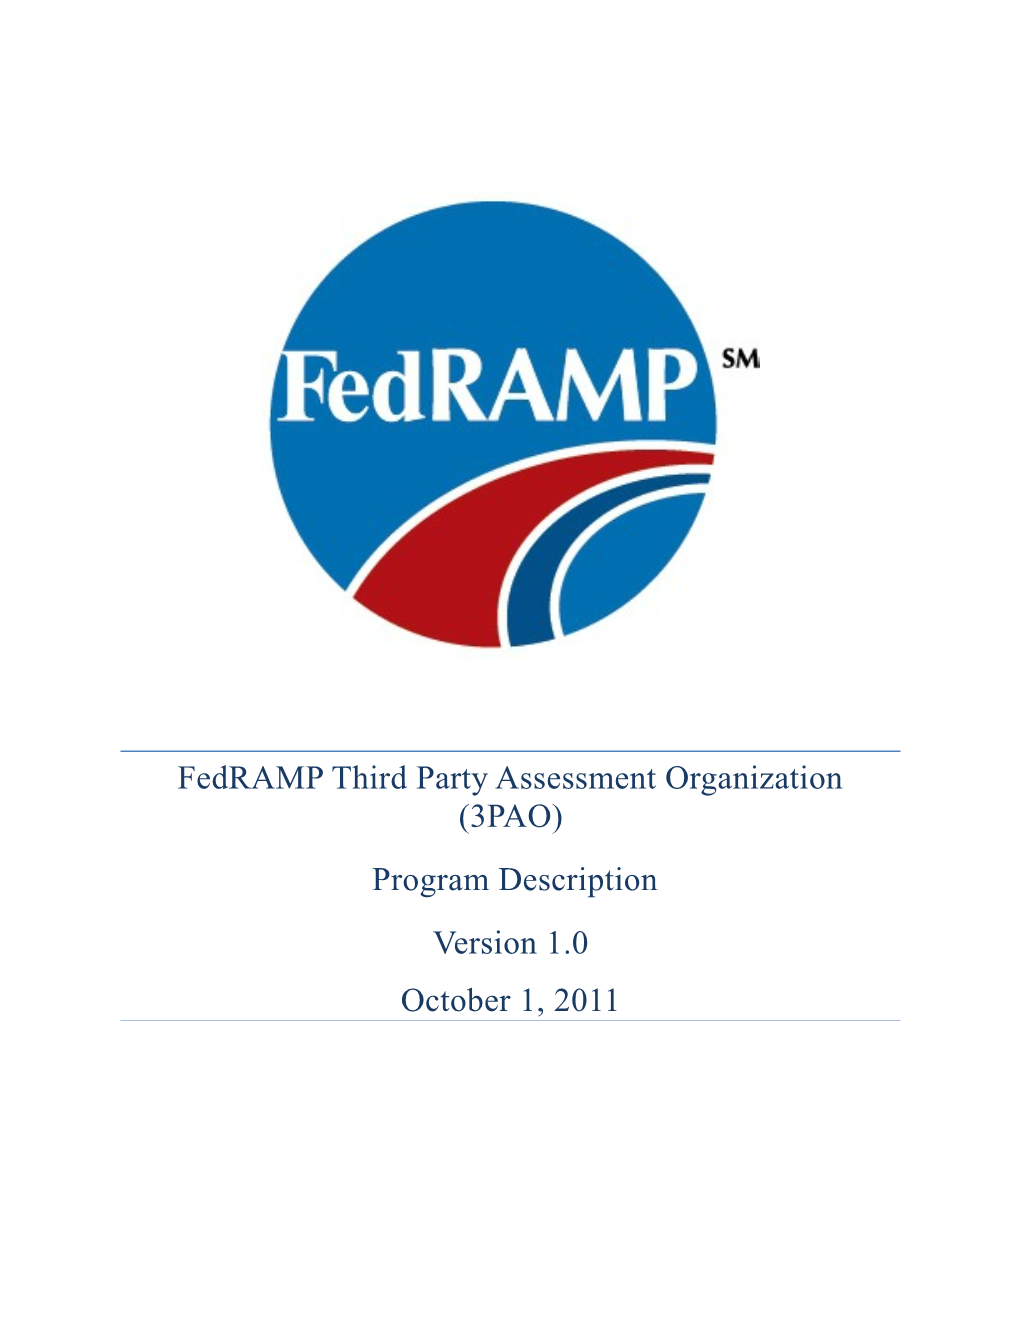 Third Party Assessment Organization (3PAO) Application Process